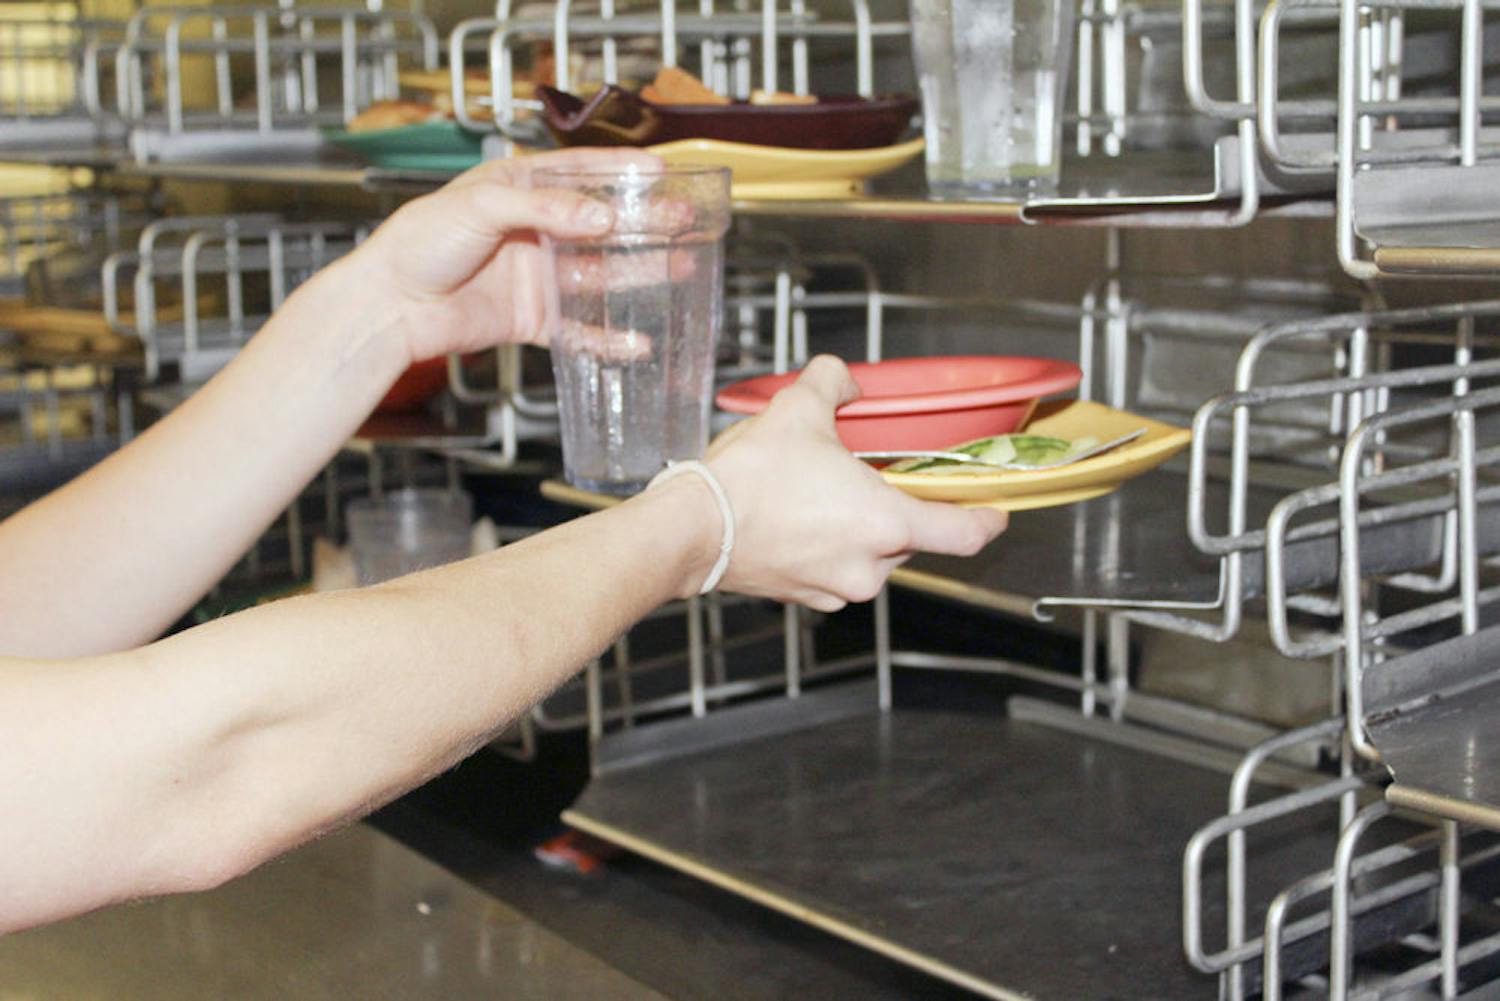 Pictured is a student placing waste on the conveyer belt in the Broward Dining Center.